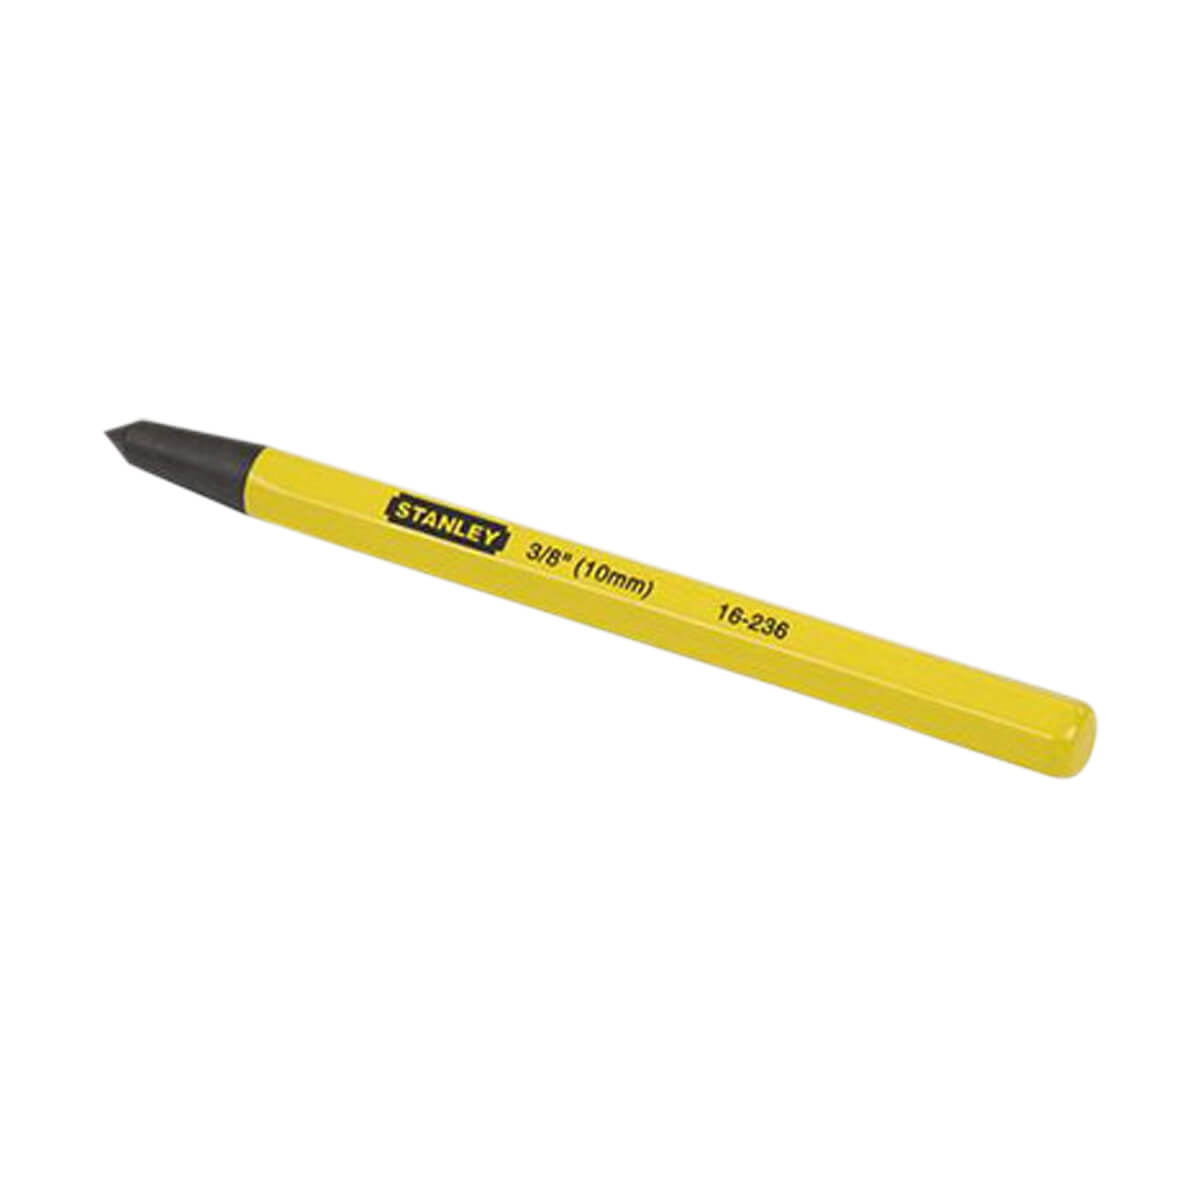 Stanley Prick Punch - 3/8-in x 5-1/2-in